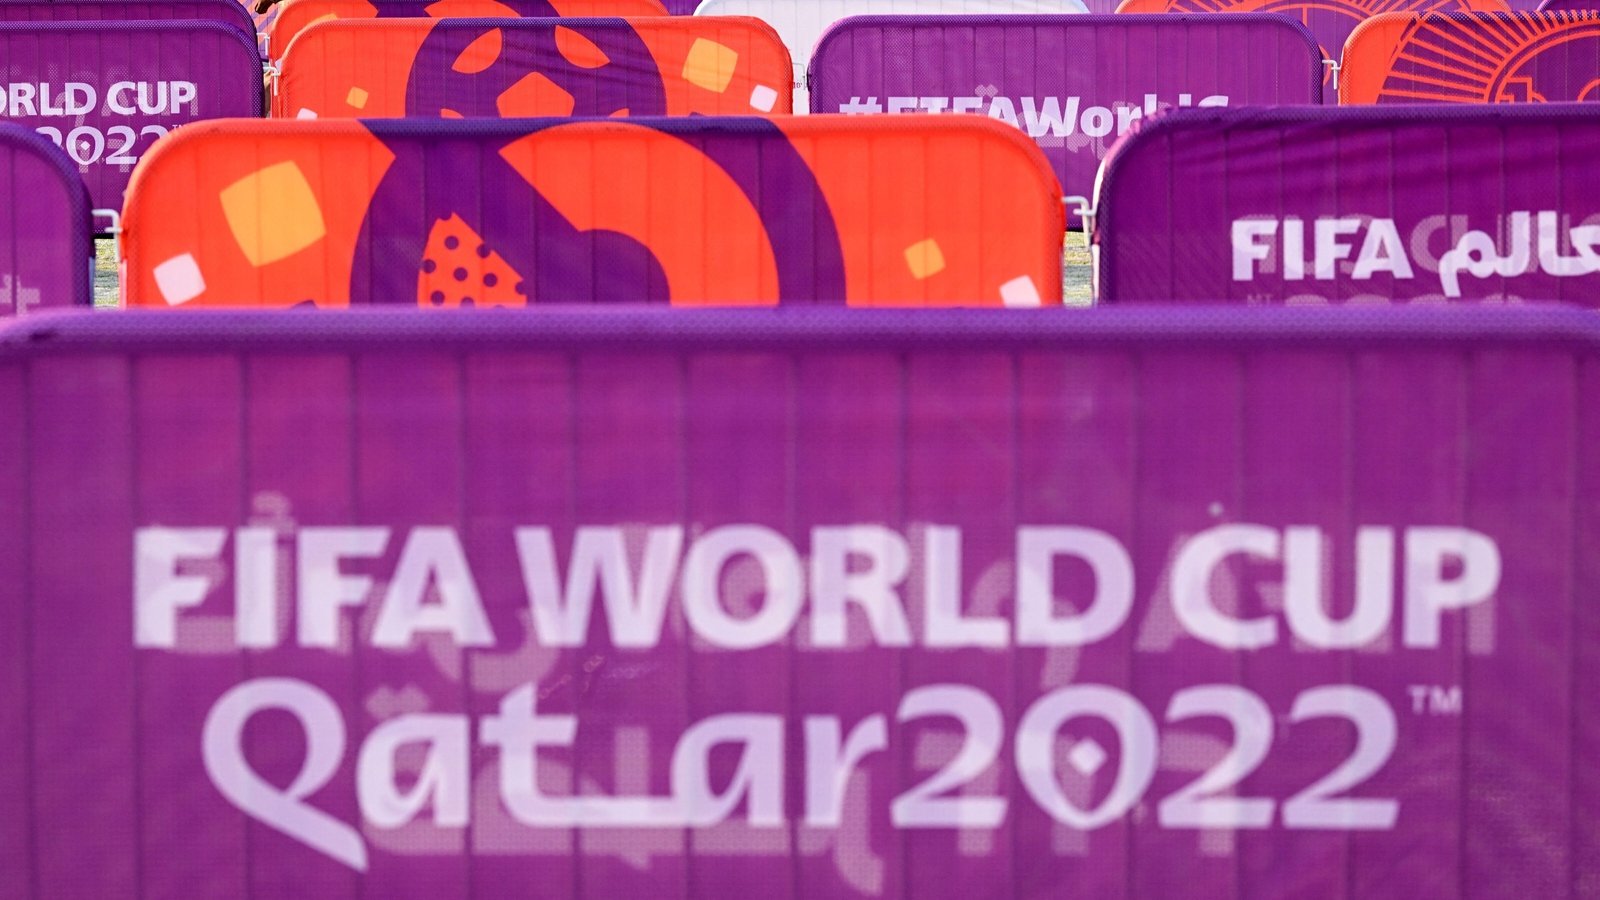 Qatar World Cup Organizers Apologize After Threatening TV Crew on Air